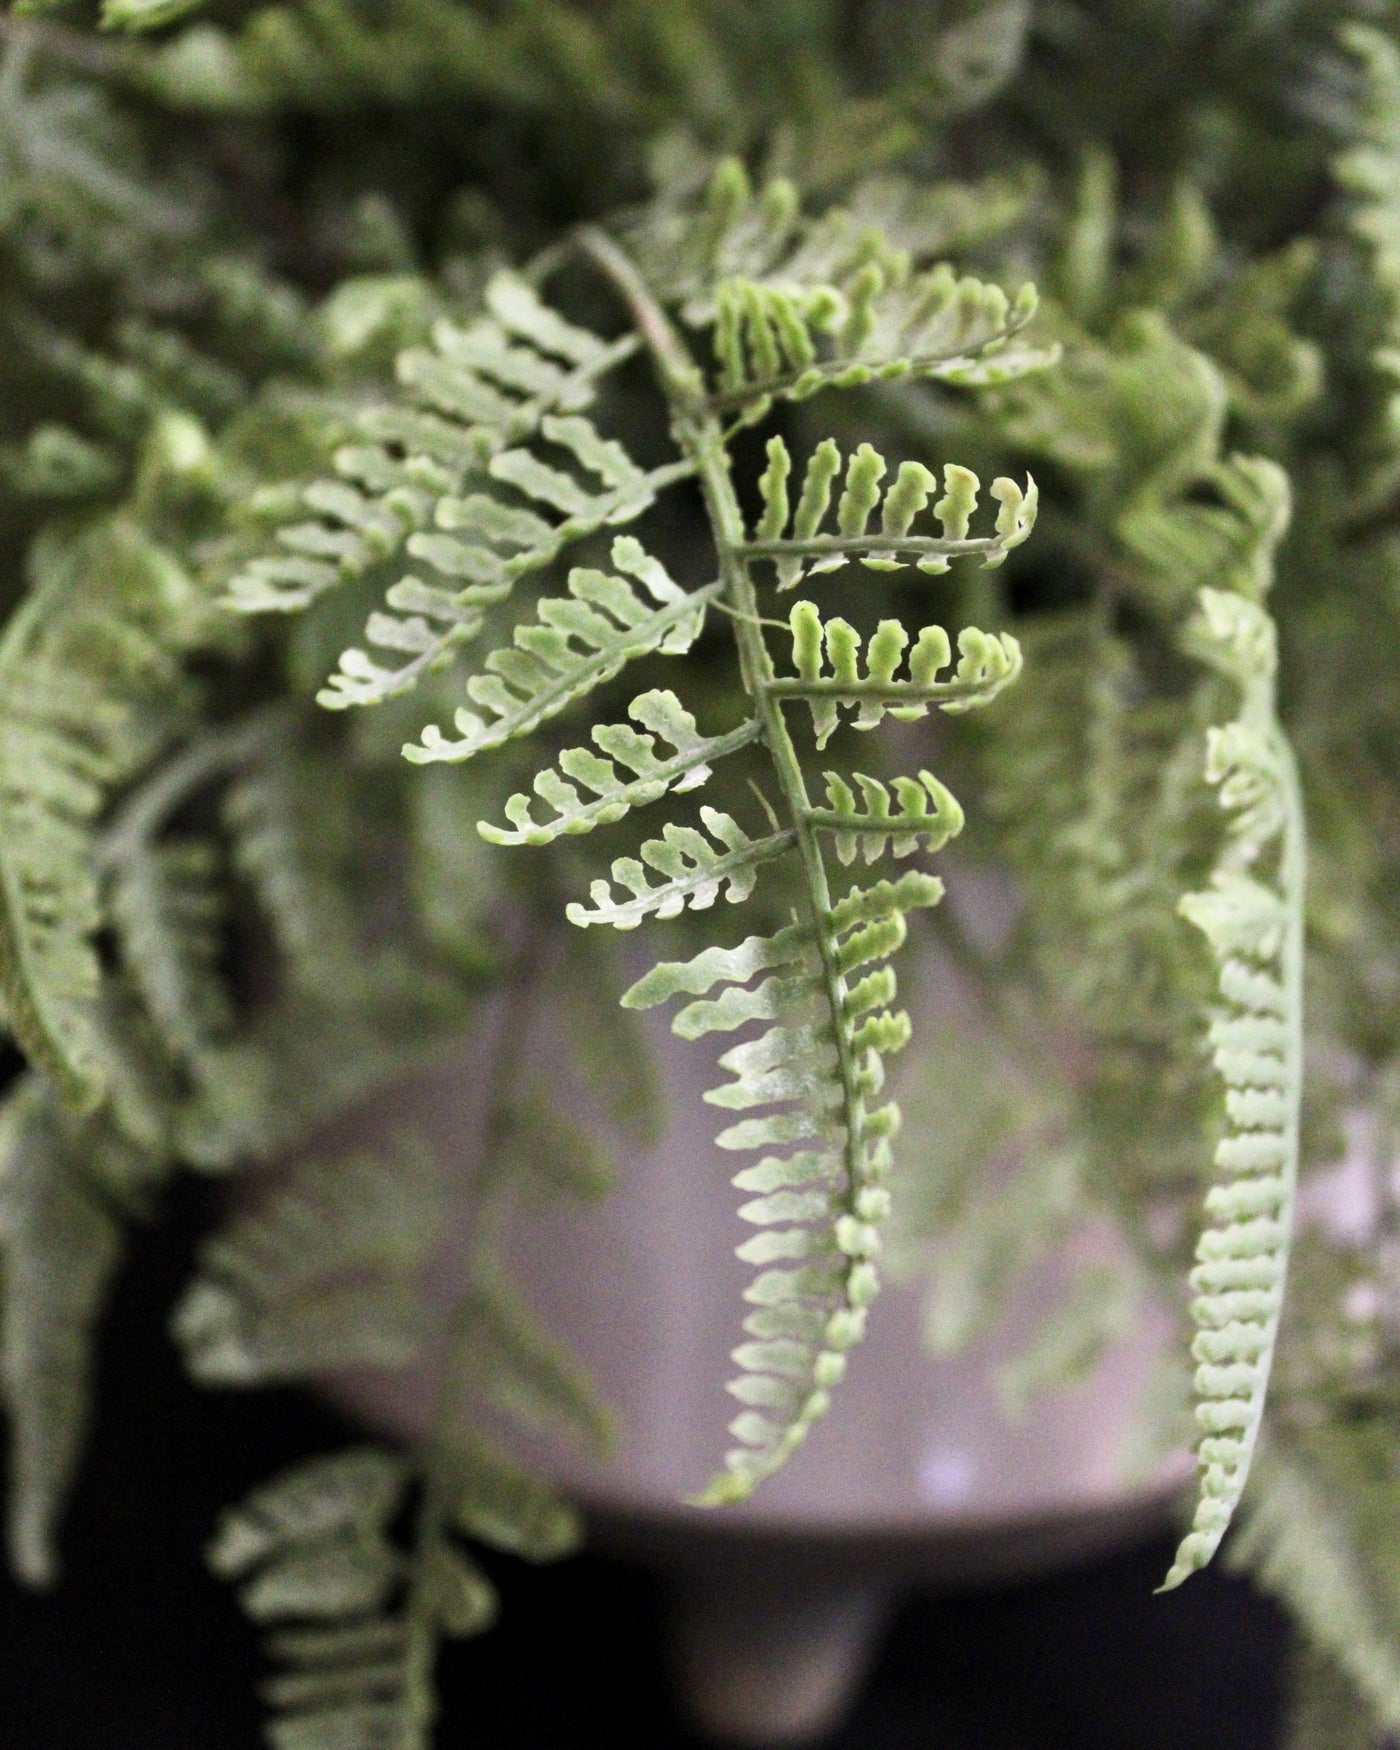 Potted Lace Fern in a large footed pot